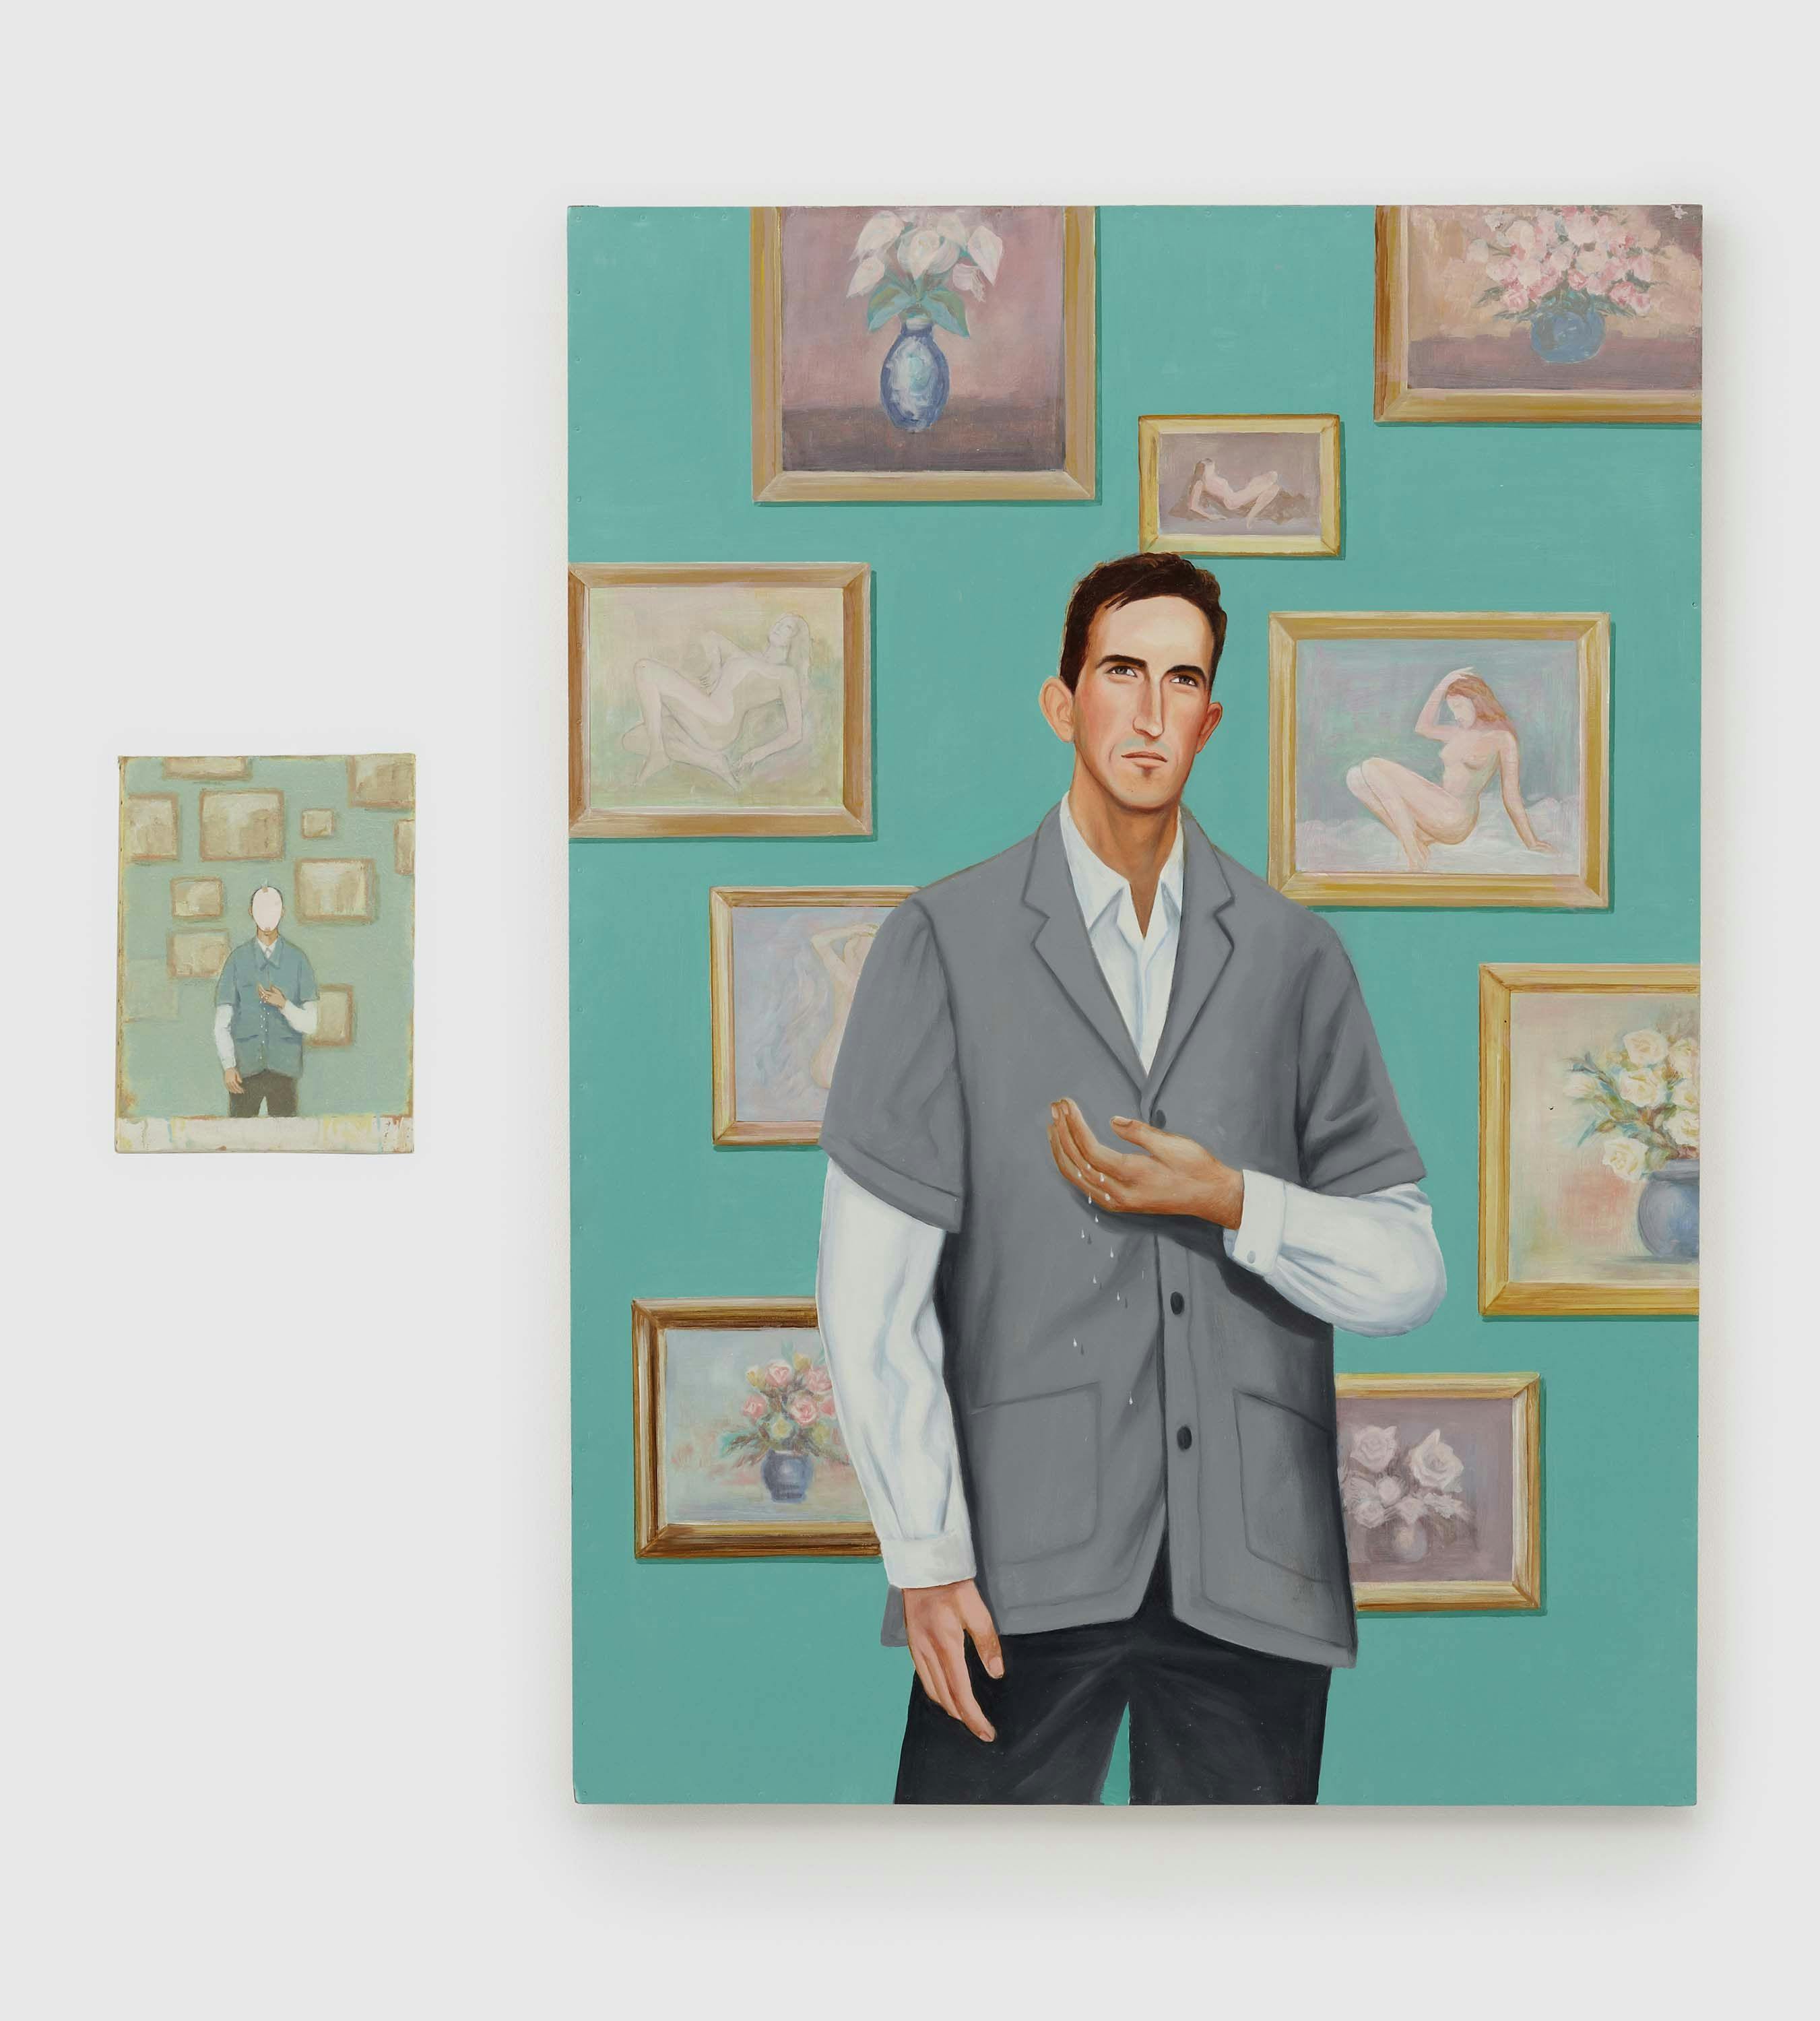 A painting by Francis Alÿs, called Untitled (Self-Portrait), 1995 to 1996.